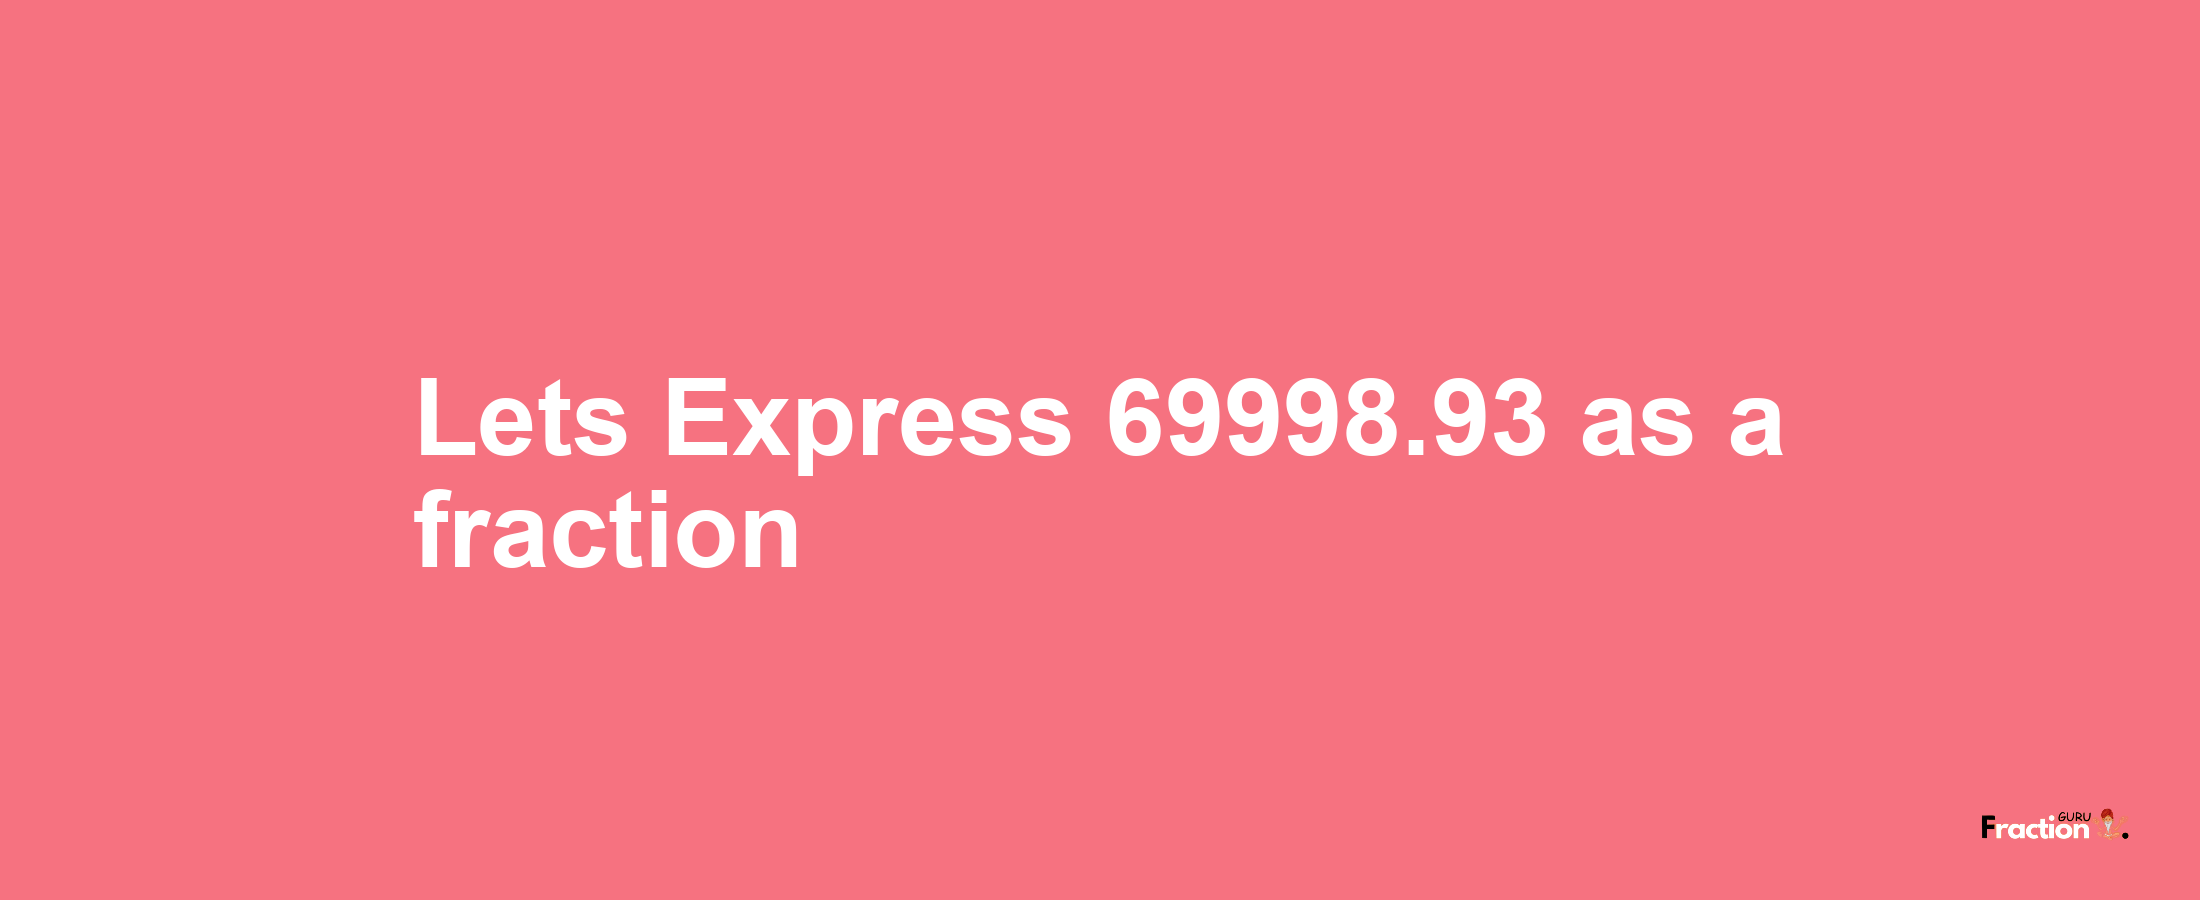 Lets Express 69998.93 as afraction